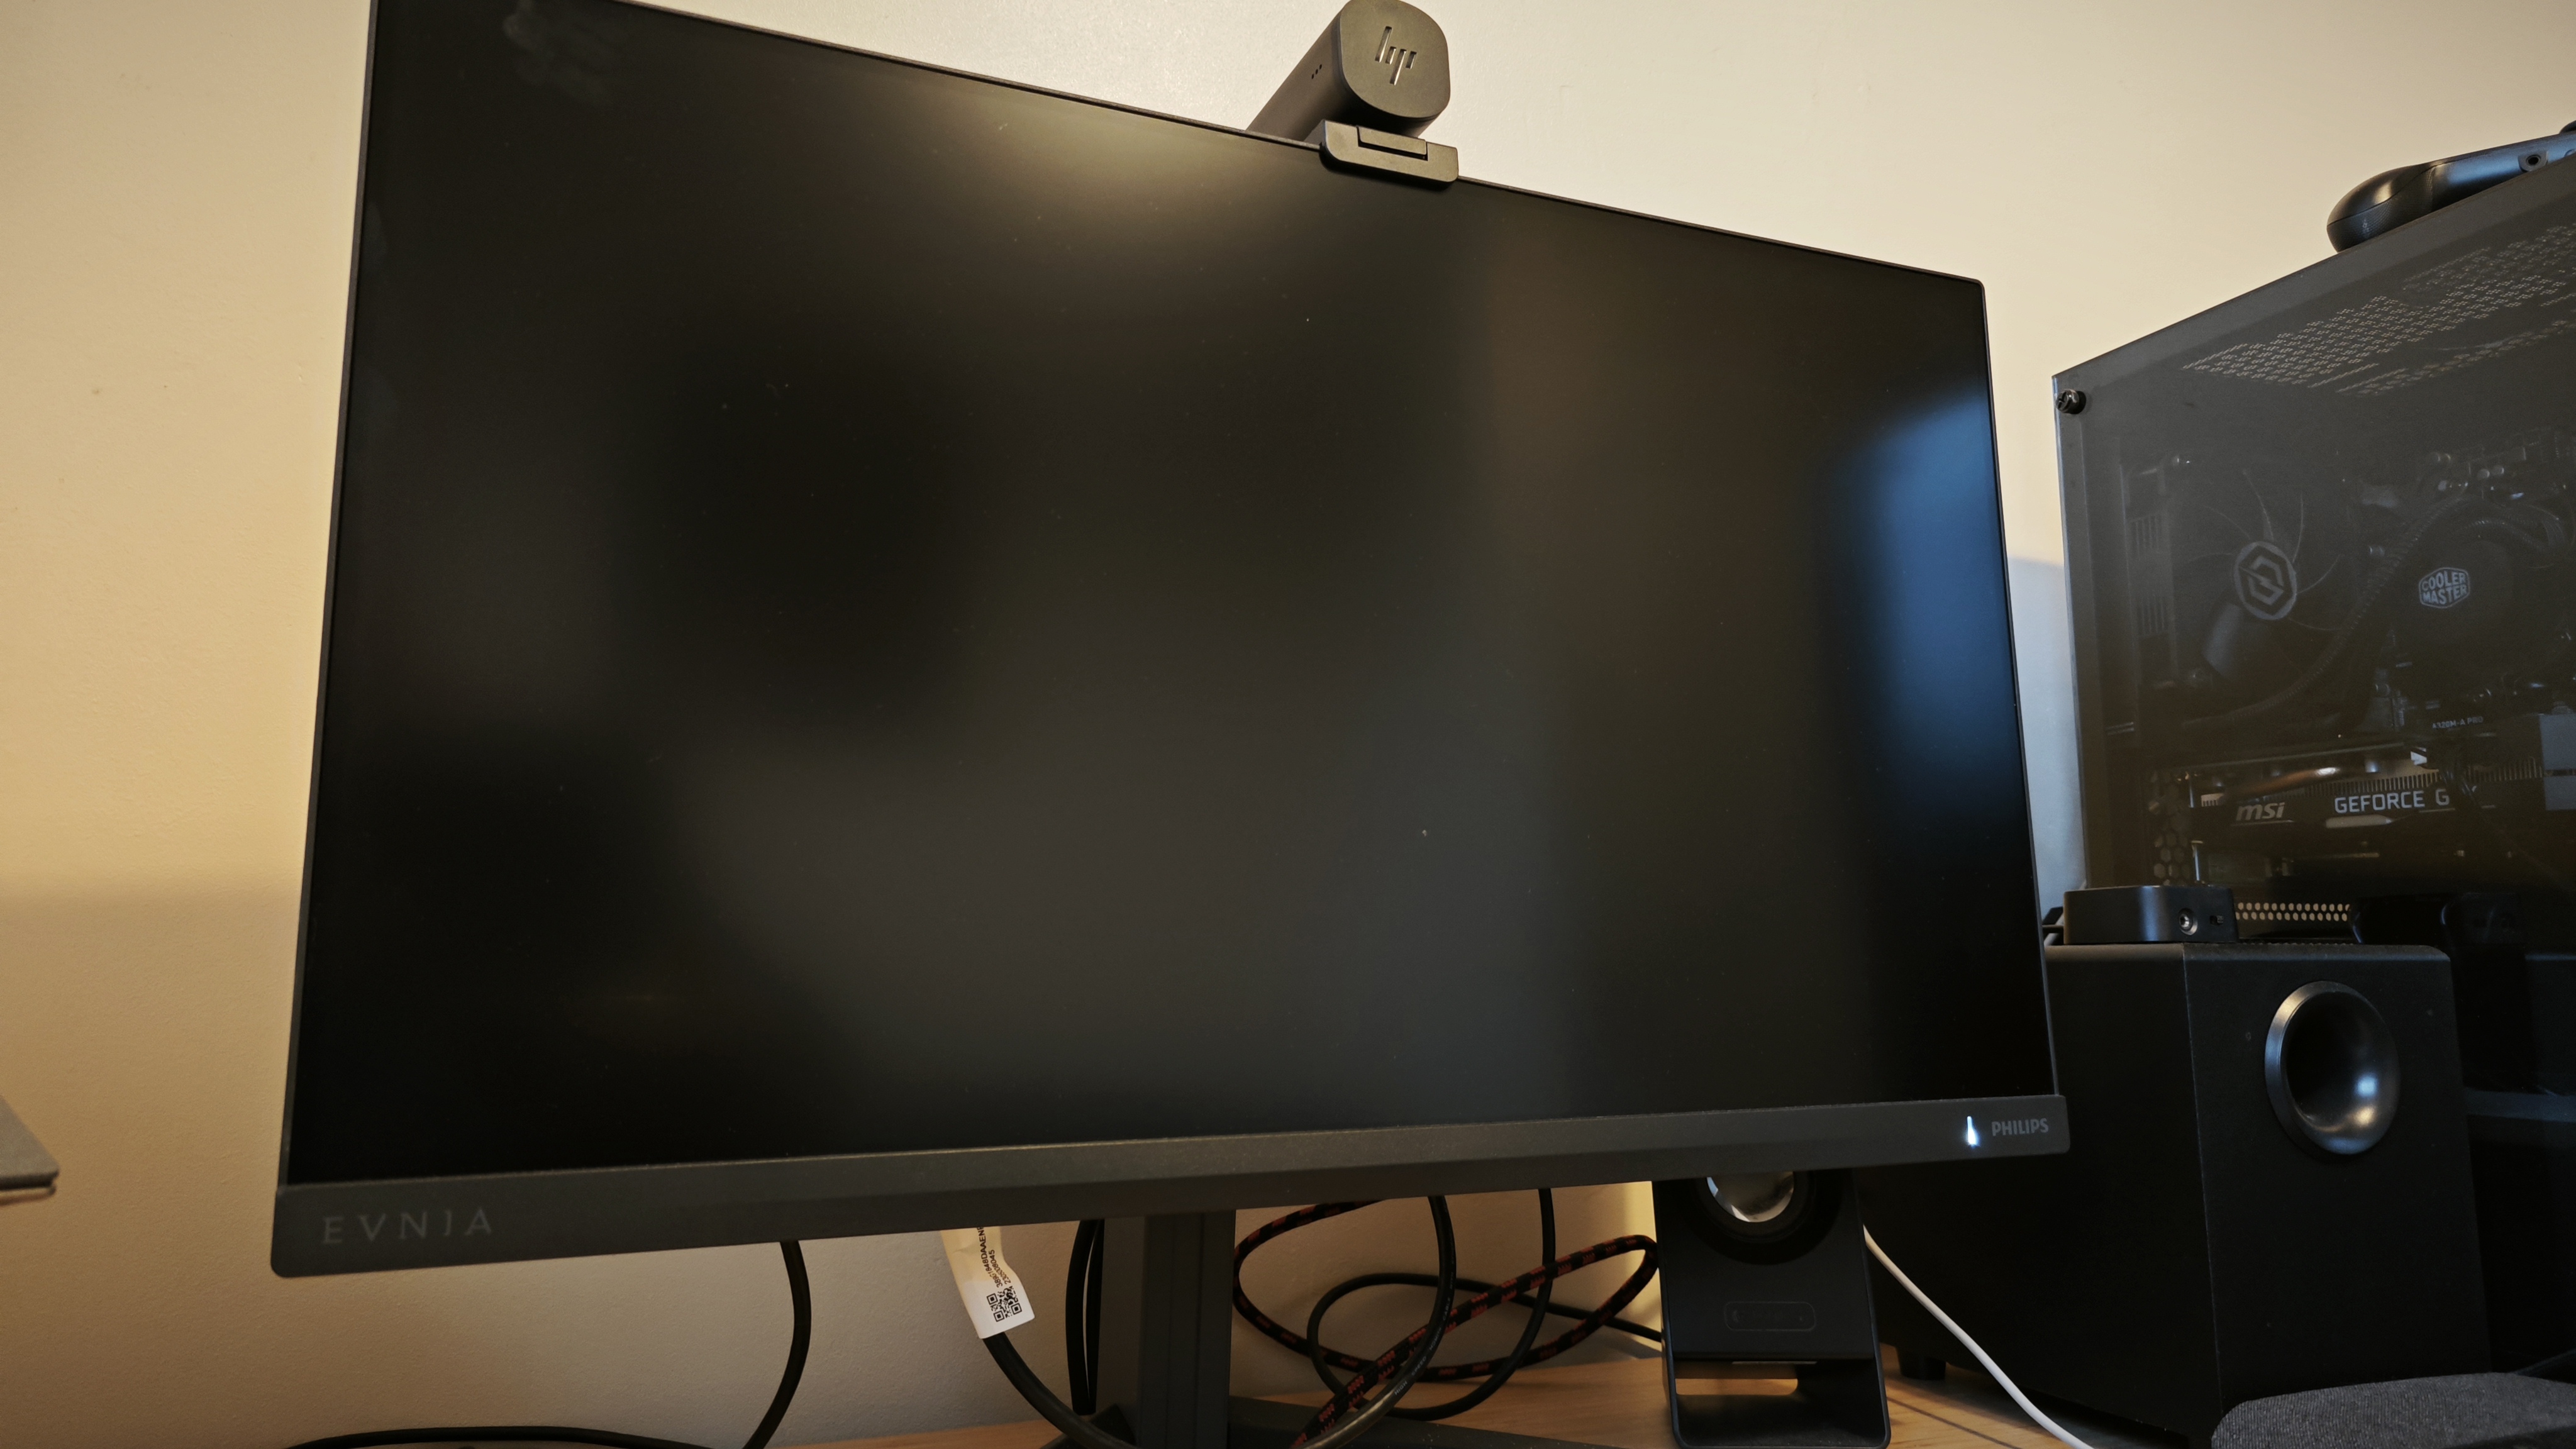 Philips Evnia 25M2N3200W review: budget gaming monitor appeals to creatives